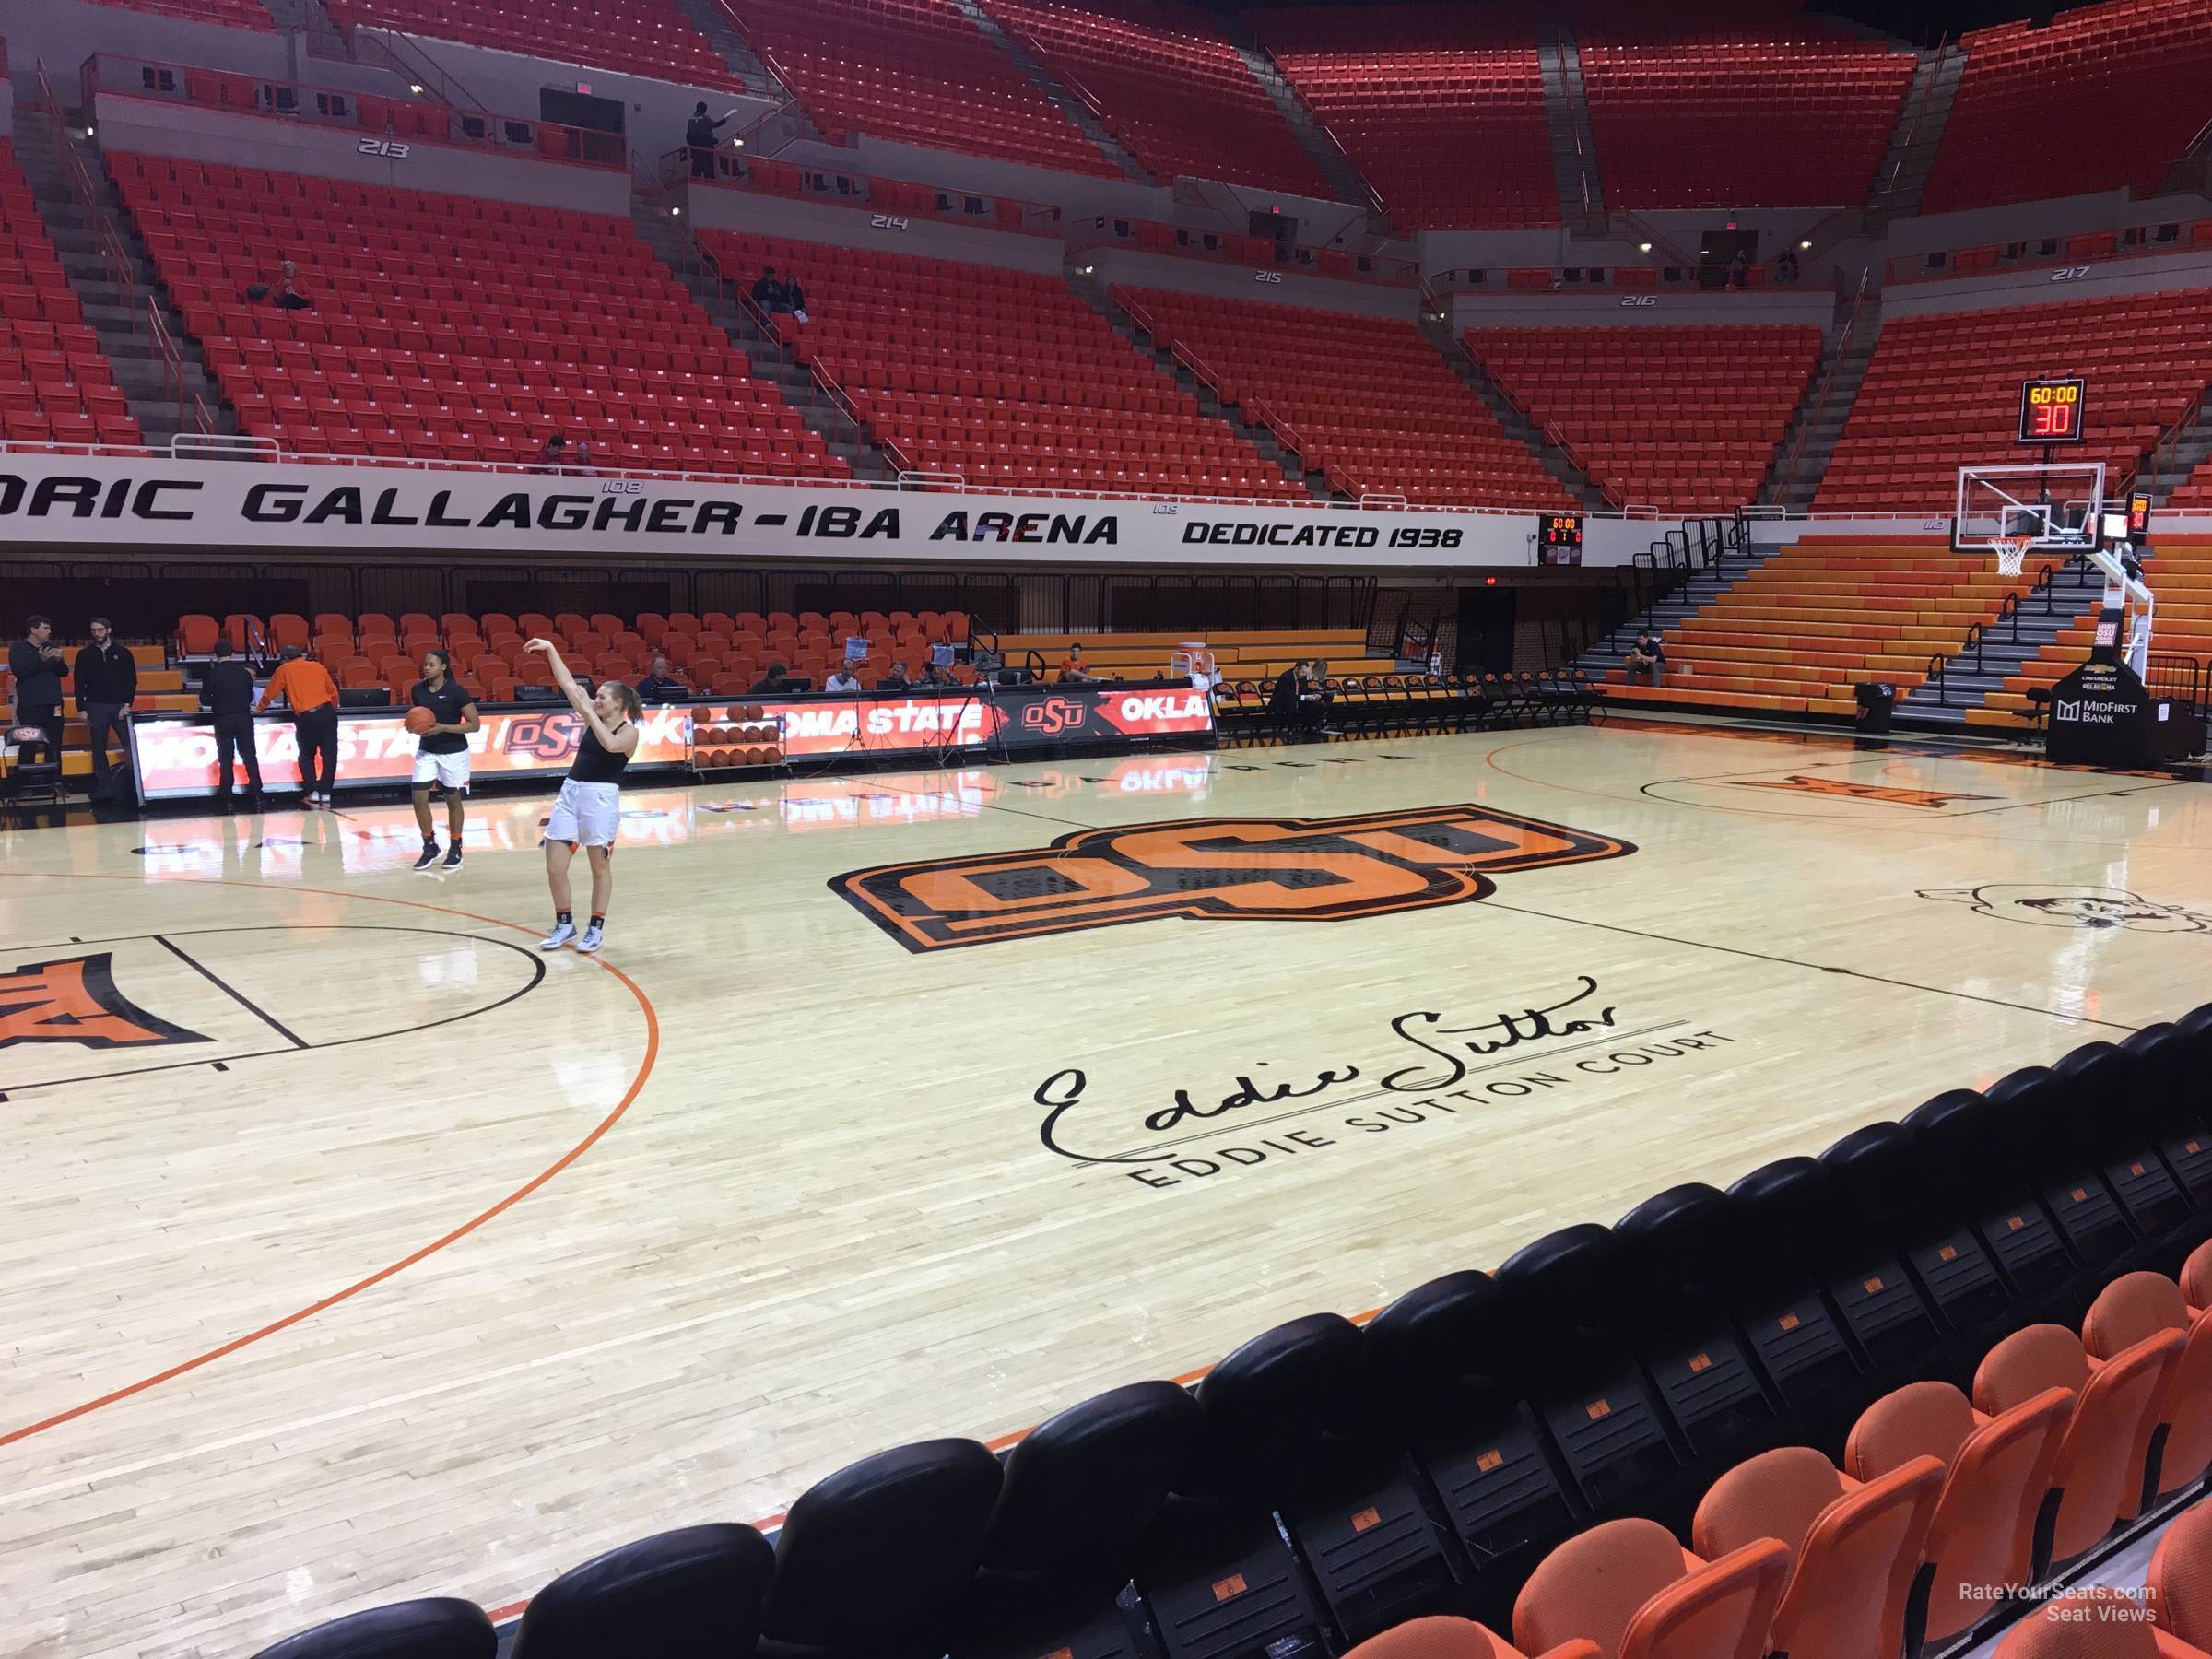 section 103, row 3 seat view  - gallagher-iba arena